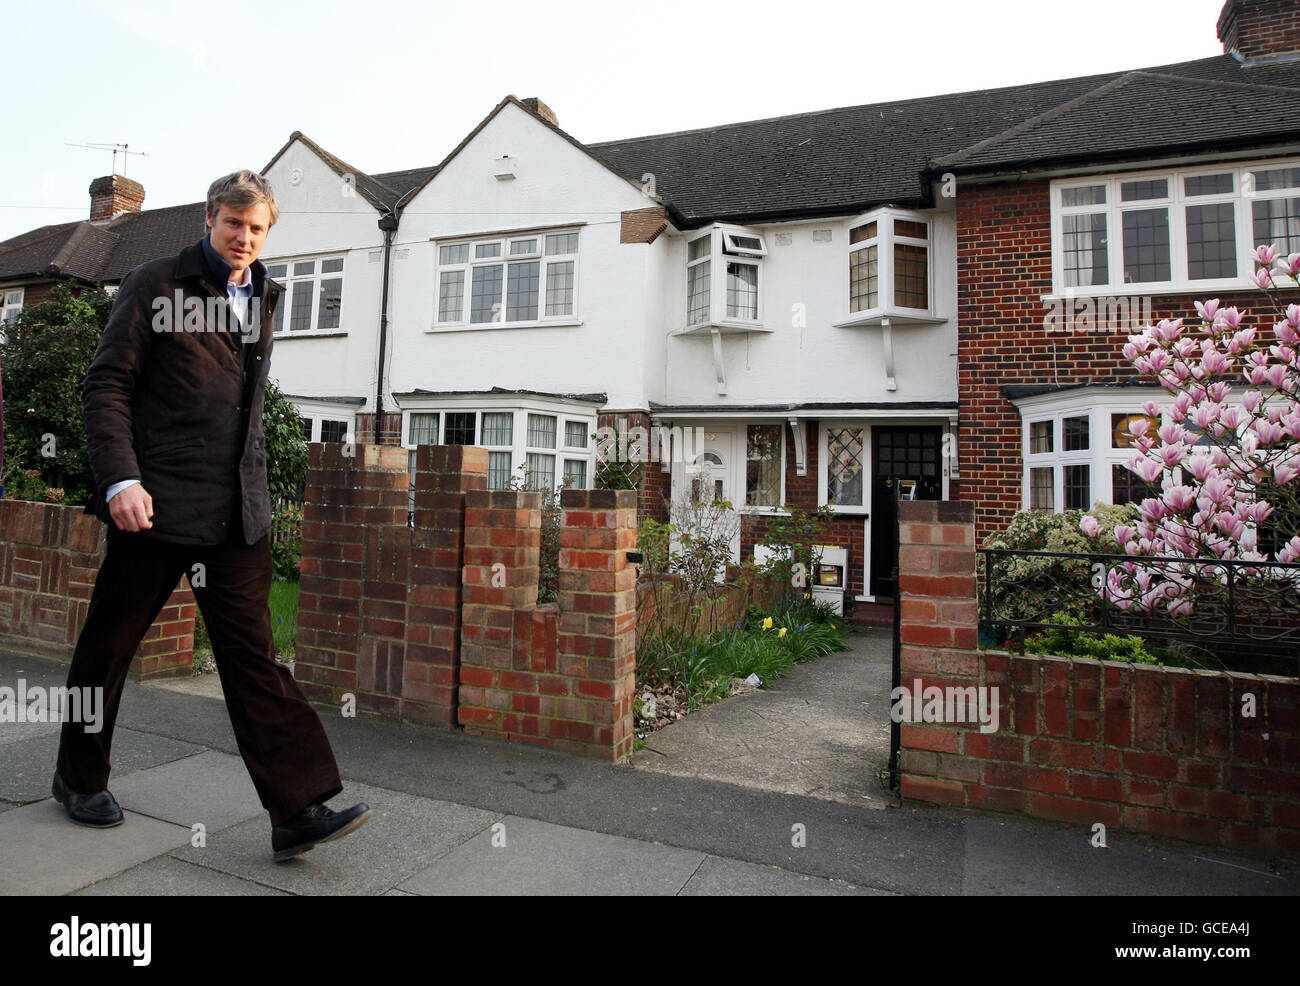 Conservative parliamentary candidate Zac Goldsmith campaigns in Tudor near Kingston upon Thames, south west London, ahead of the General Election on May 6. Stock Photo